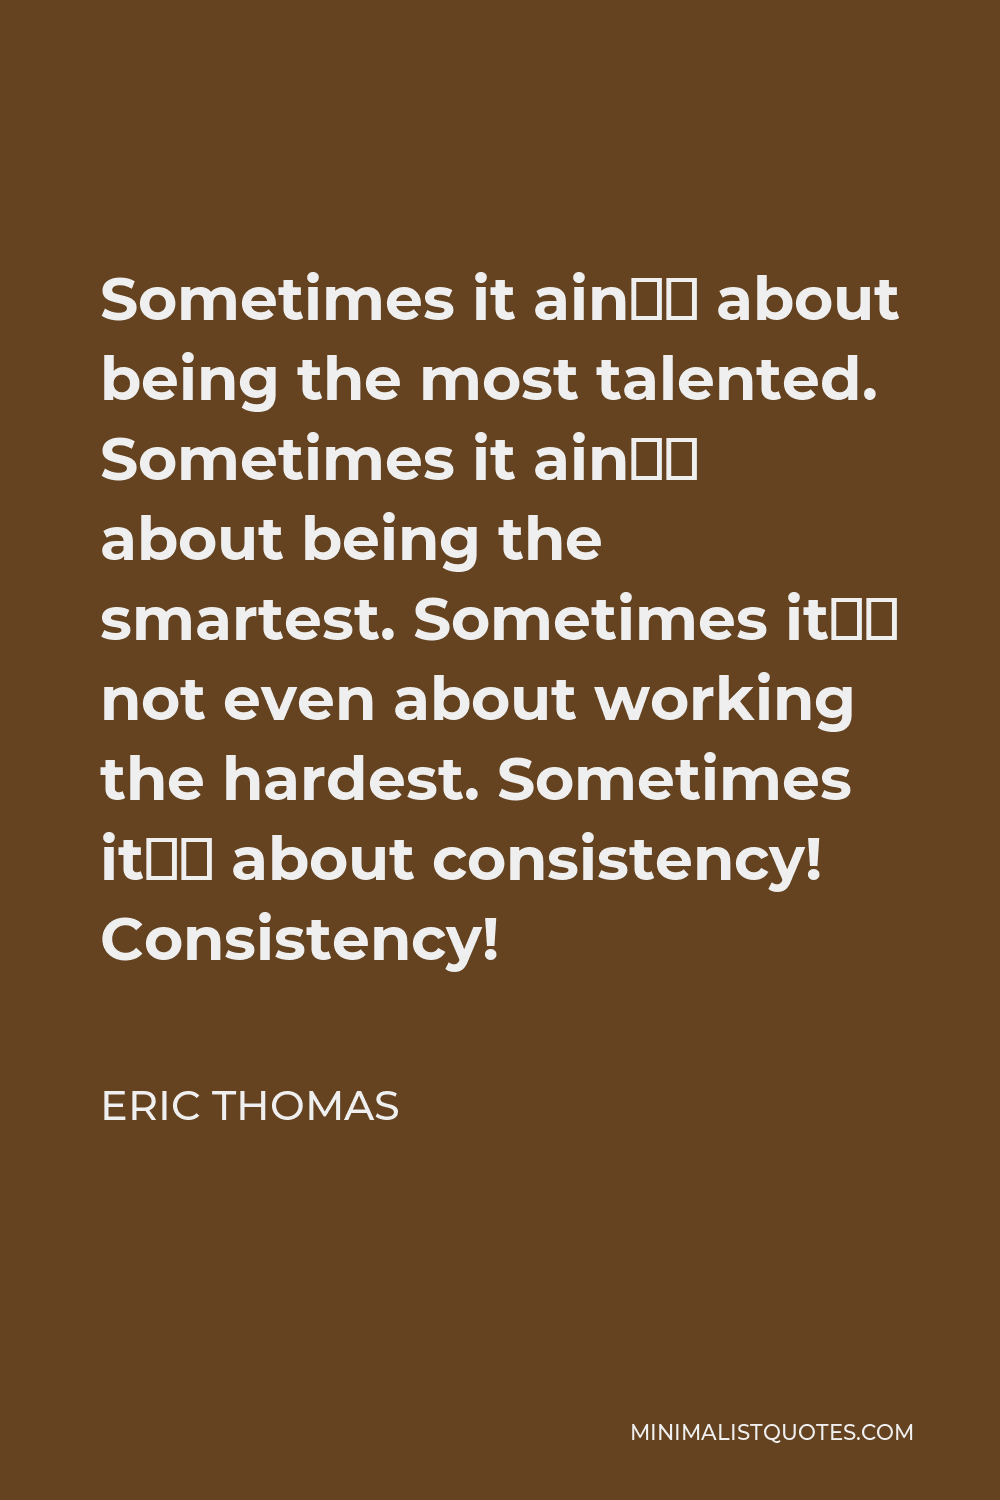 Eric Thomas Quote - Sometimes it ain’t about being the most talented. Sometimes it ain’t about being the smartest. Sometimes it’s not even about working the hardest. Sometimes it’s about consistency! Consistency!